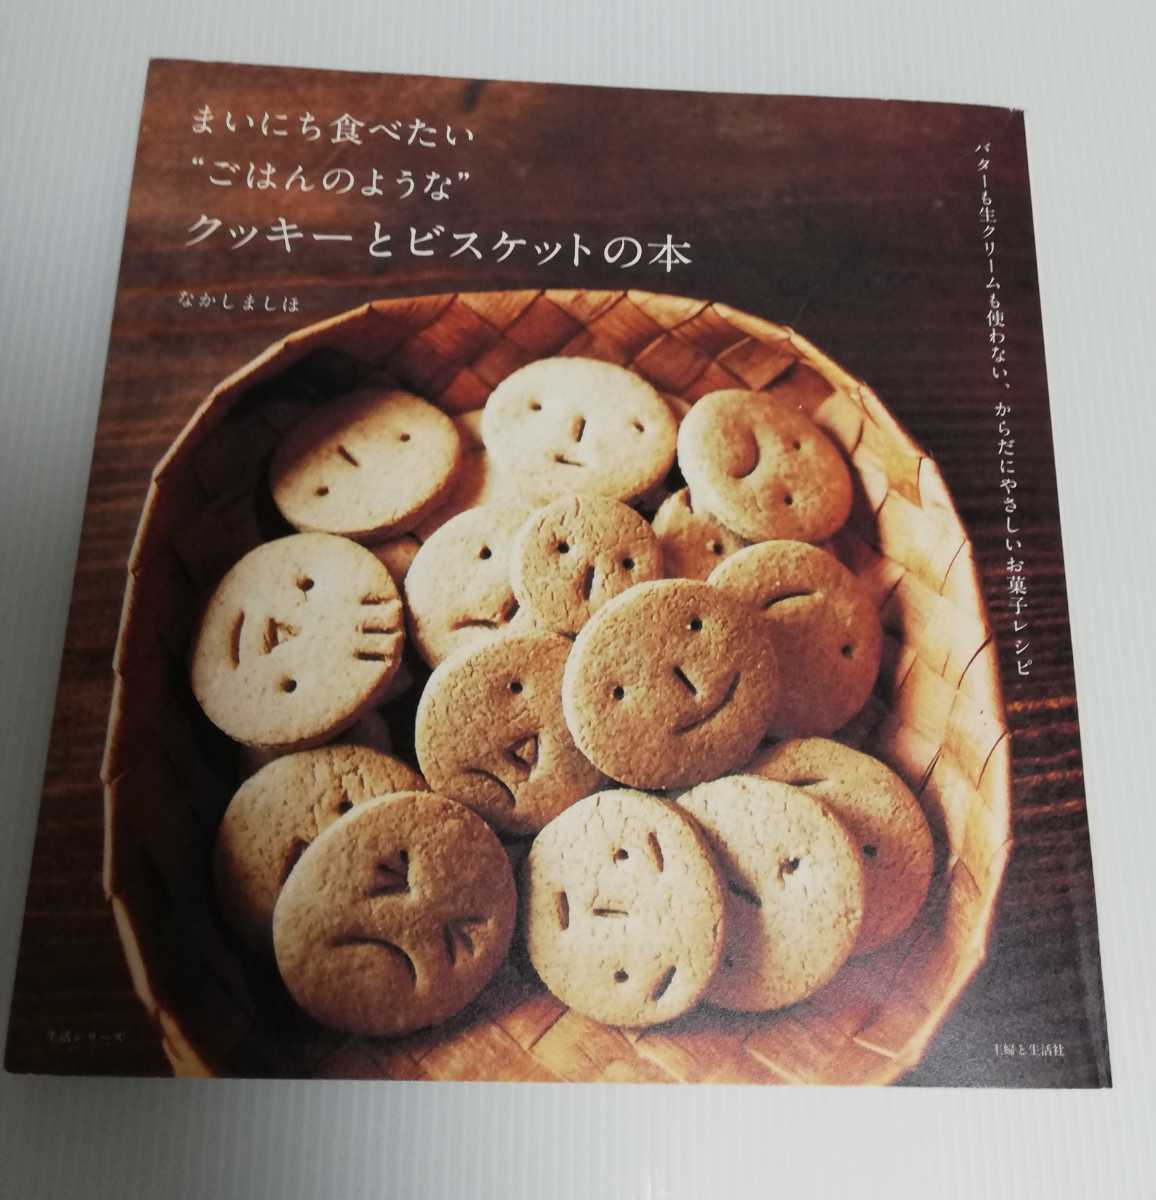 # cookie . biscuit. book@! butter . raw cream ... not! confection. making person (*^^*).... together making not .!!!